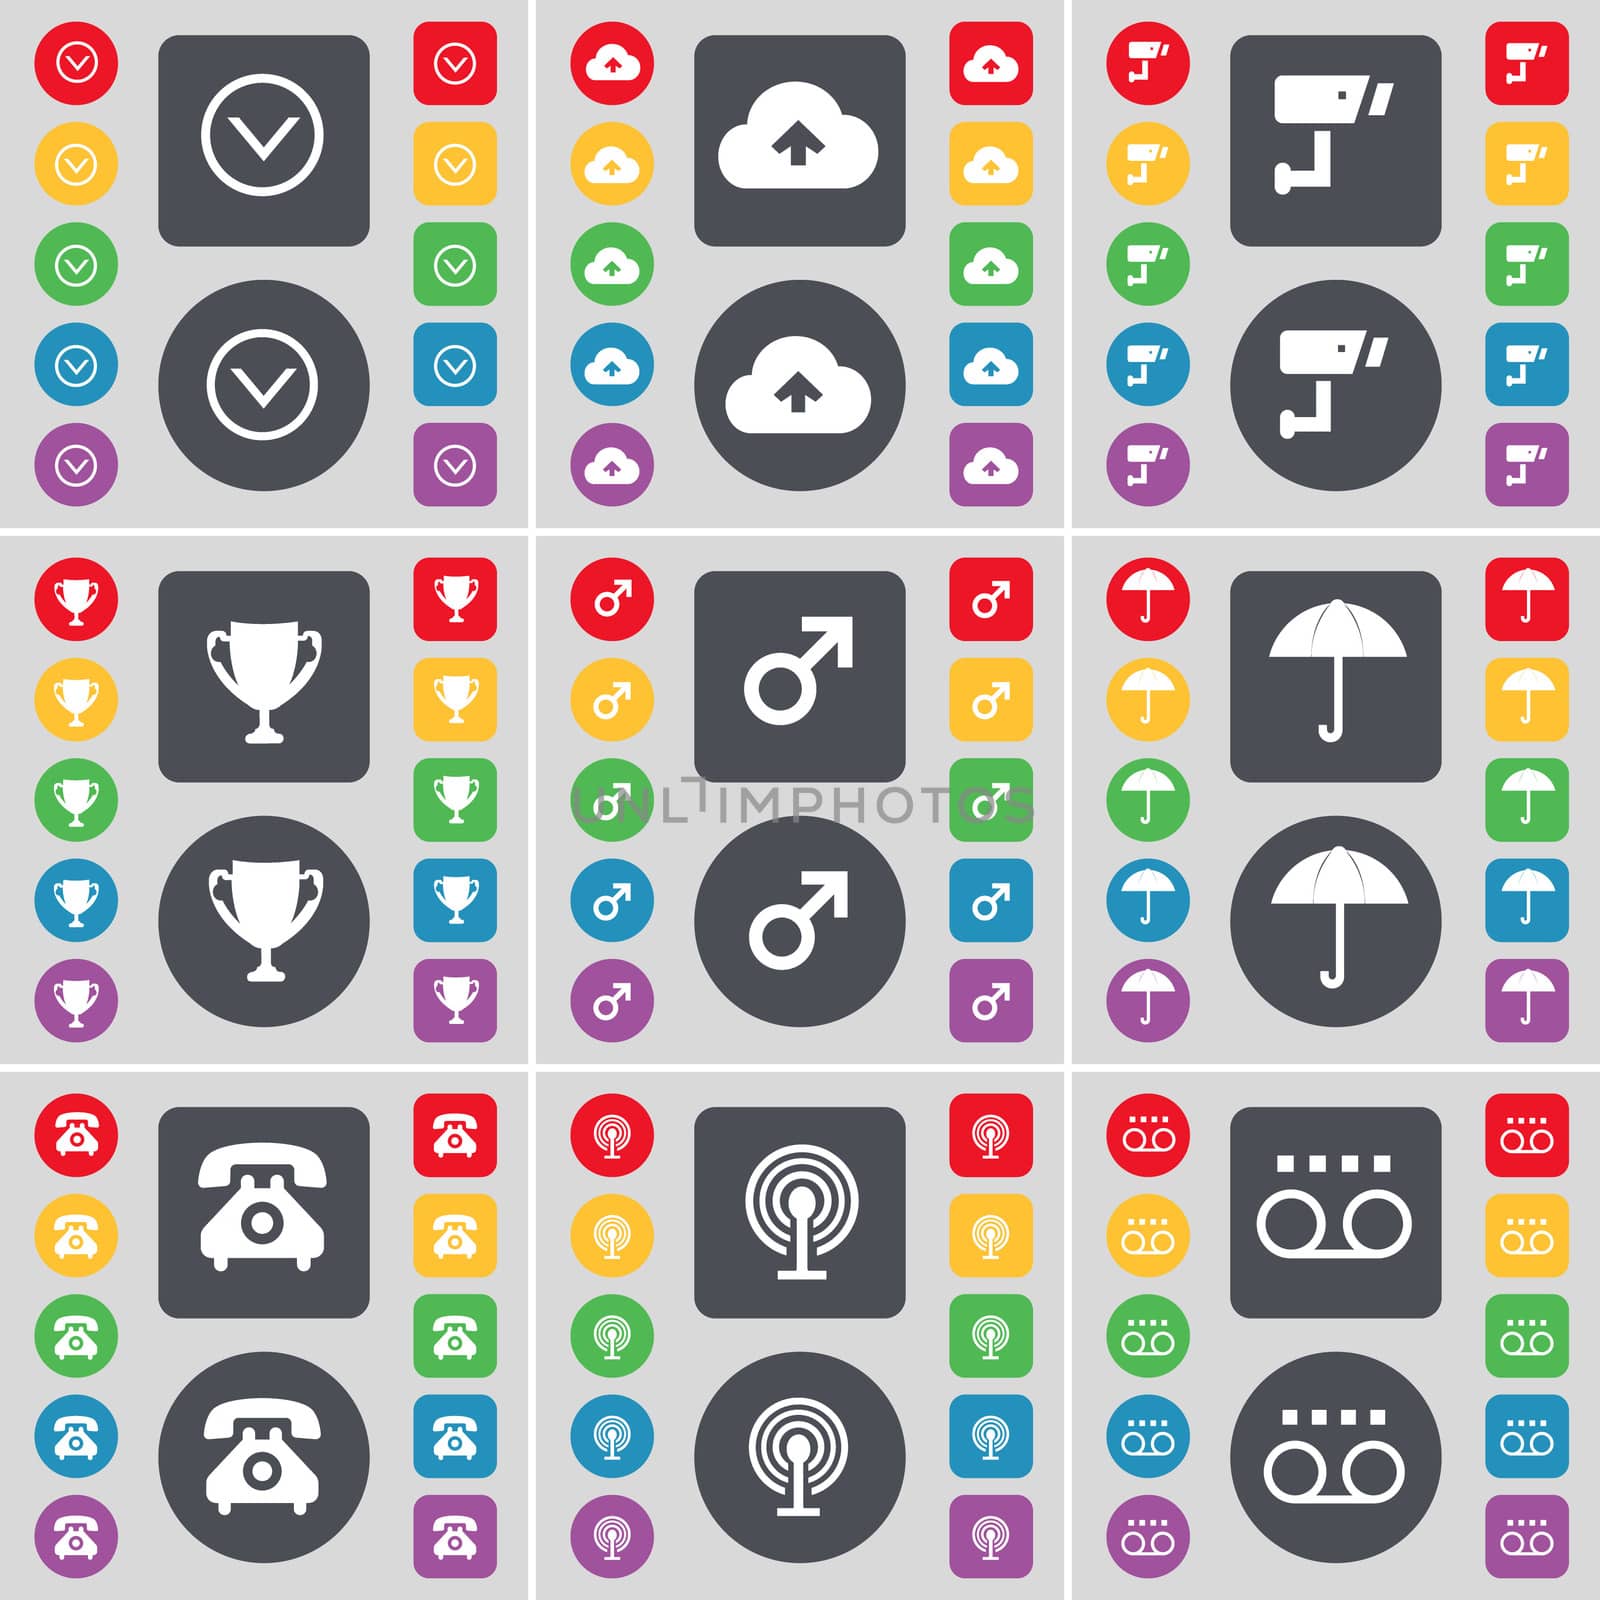 Arrow down, Cloud, CCTV, Cup, Mars symbol, Umbrella, Retro phone, Wi-Fi, Cassette icon symbol. A large set of flat, colored buttons for your design. illustration